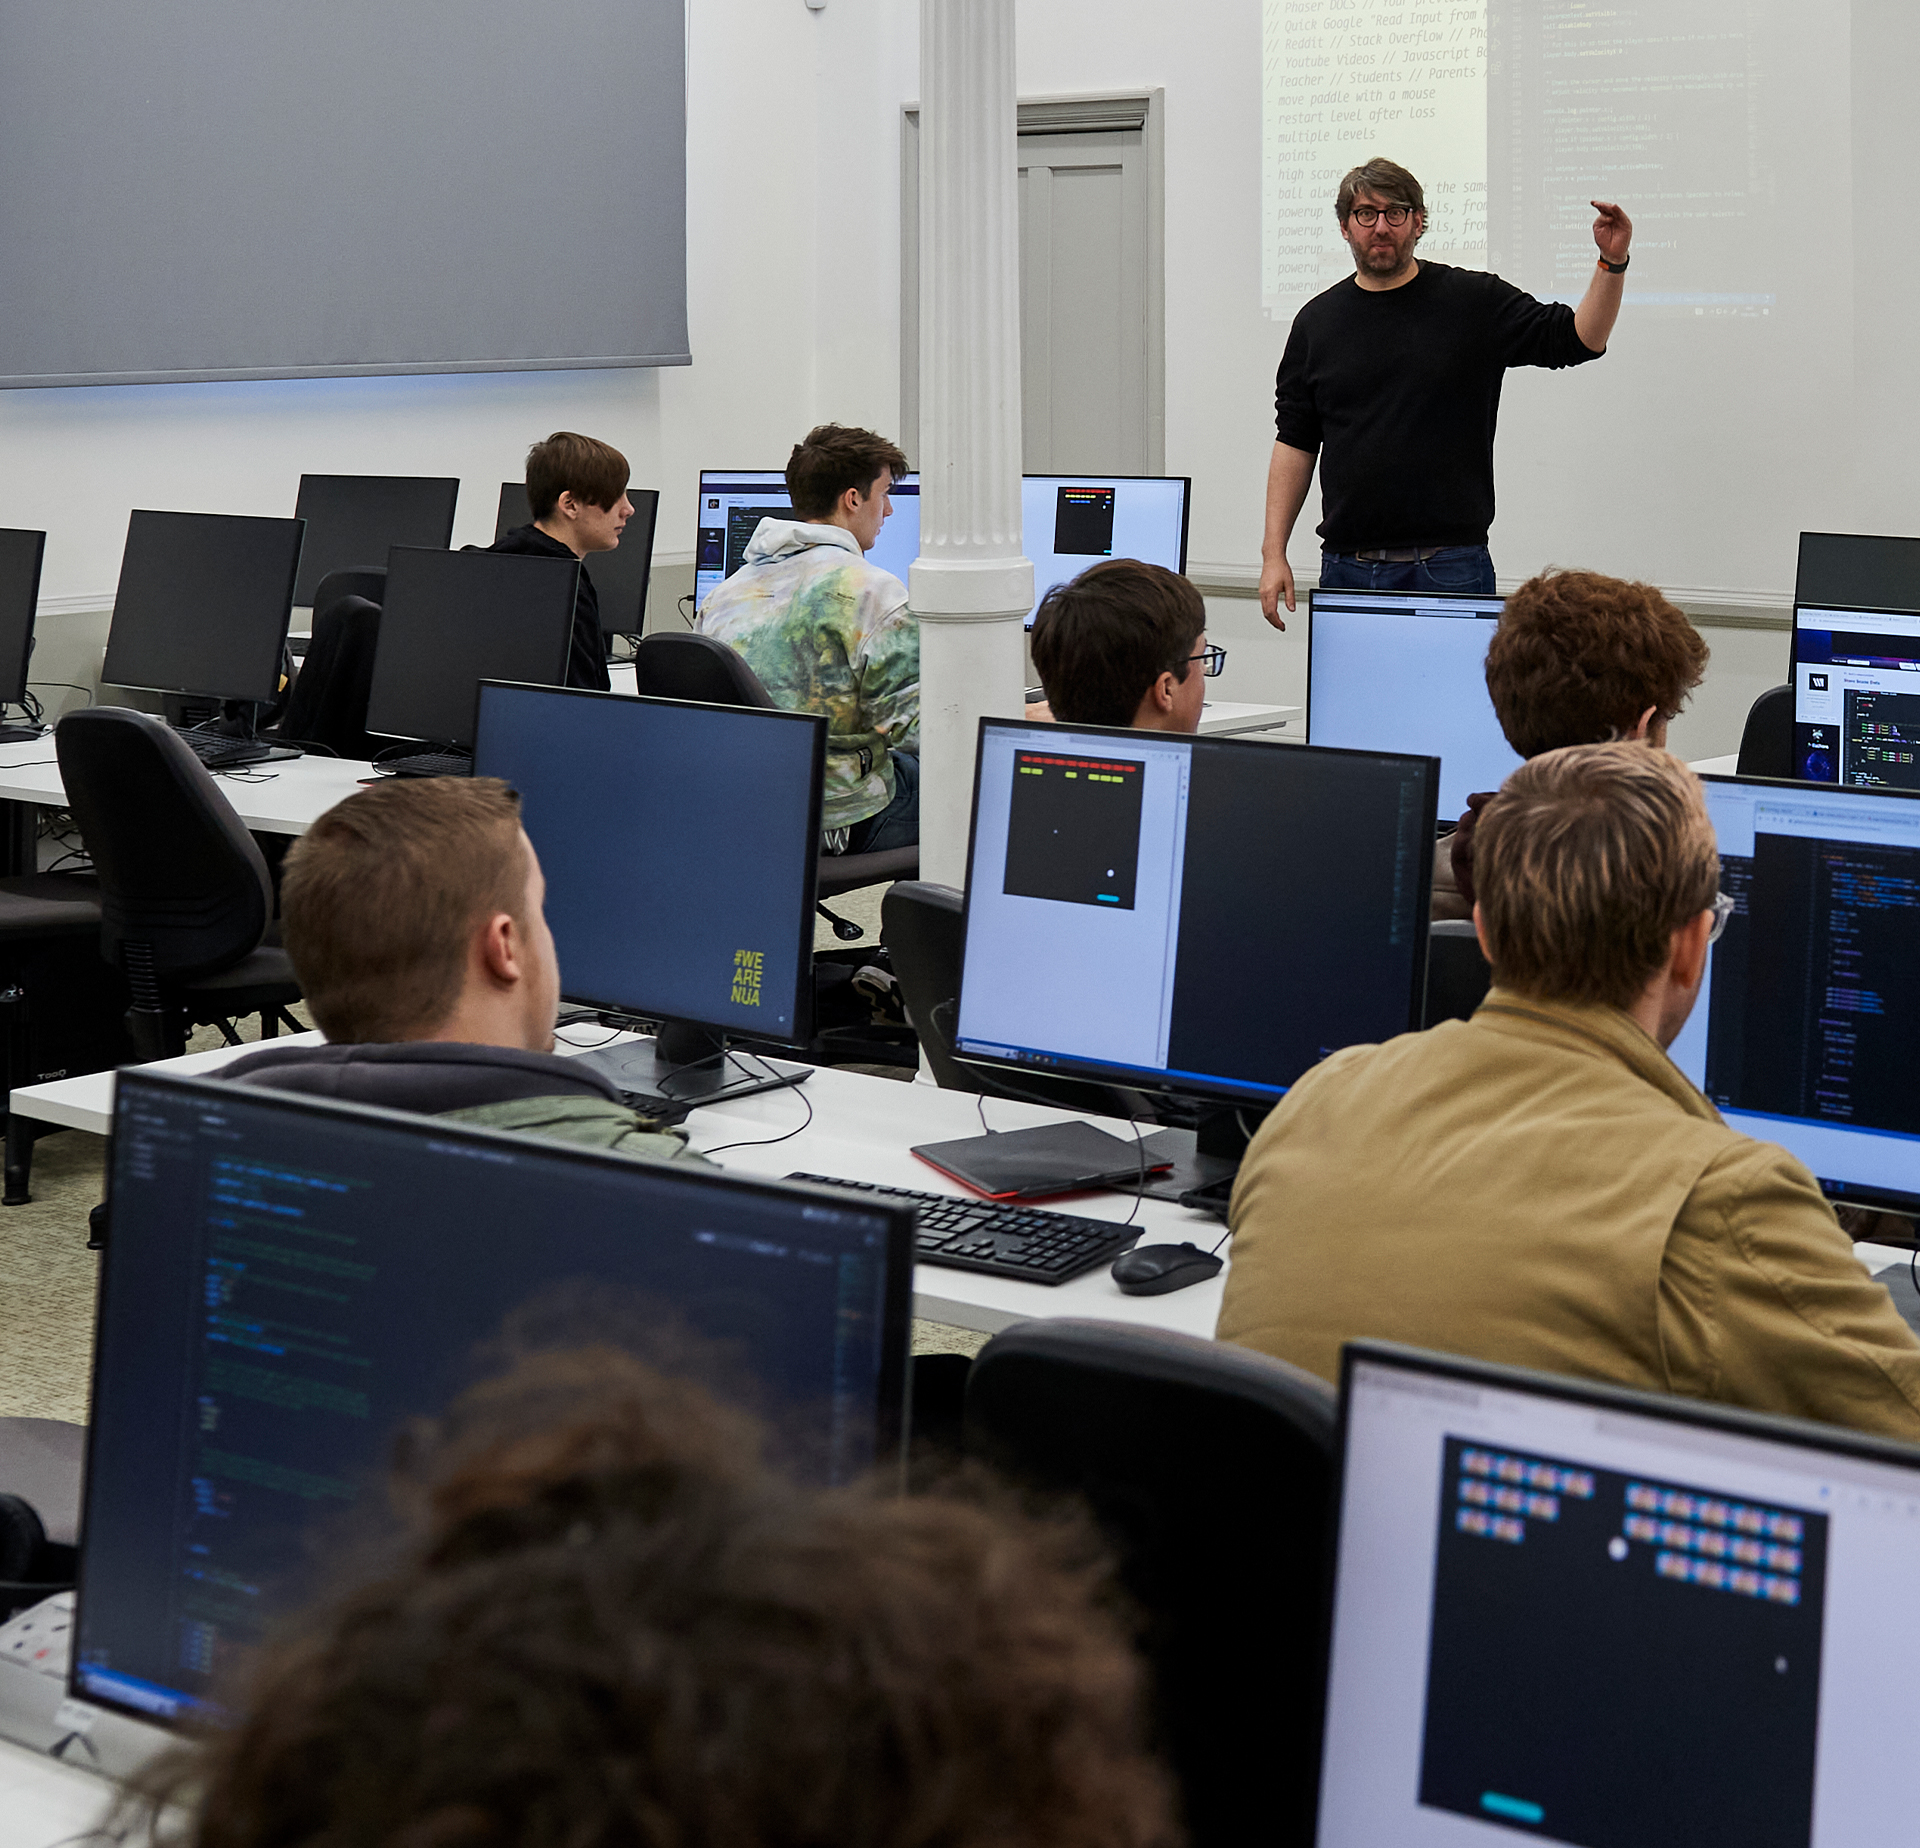 Technician teaching a Games Development workshop with students working on computers.